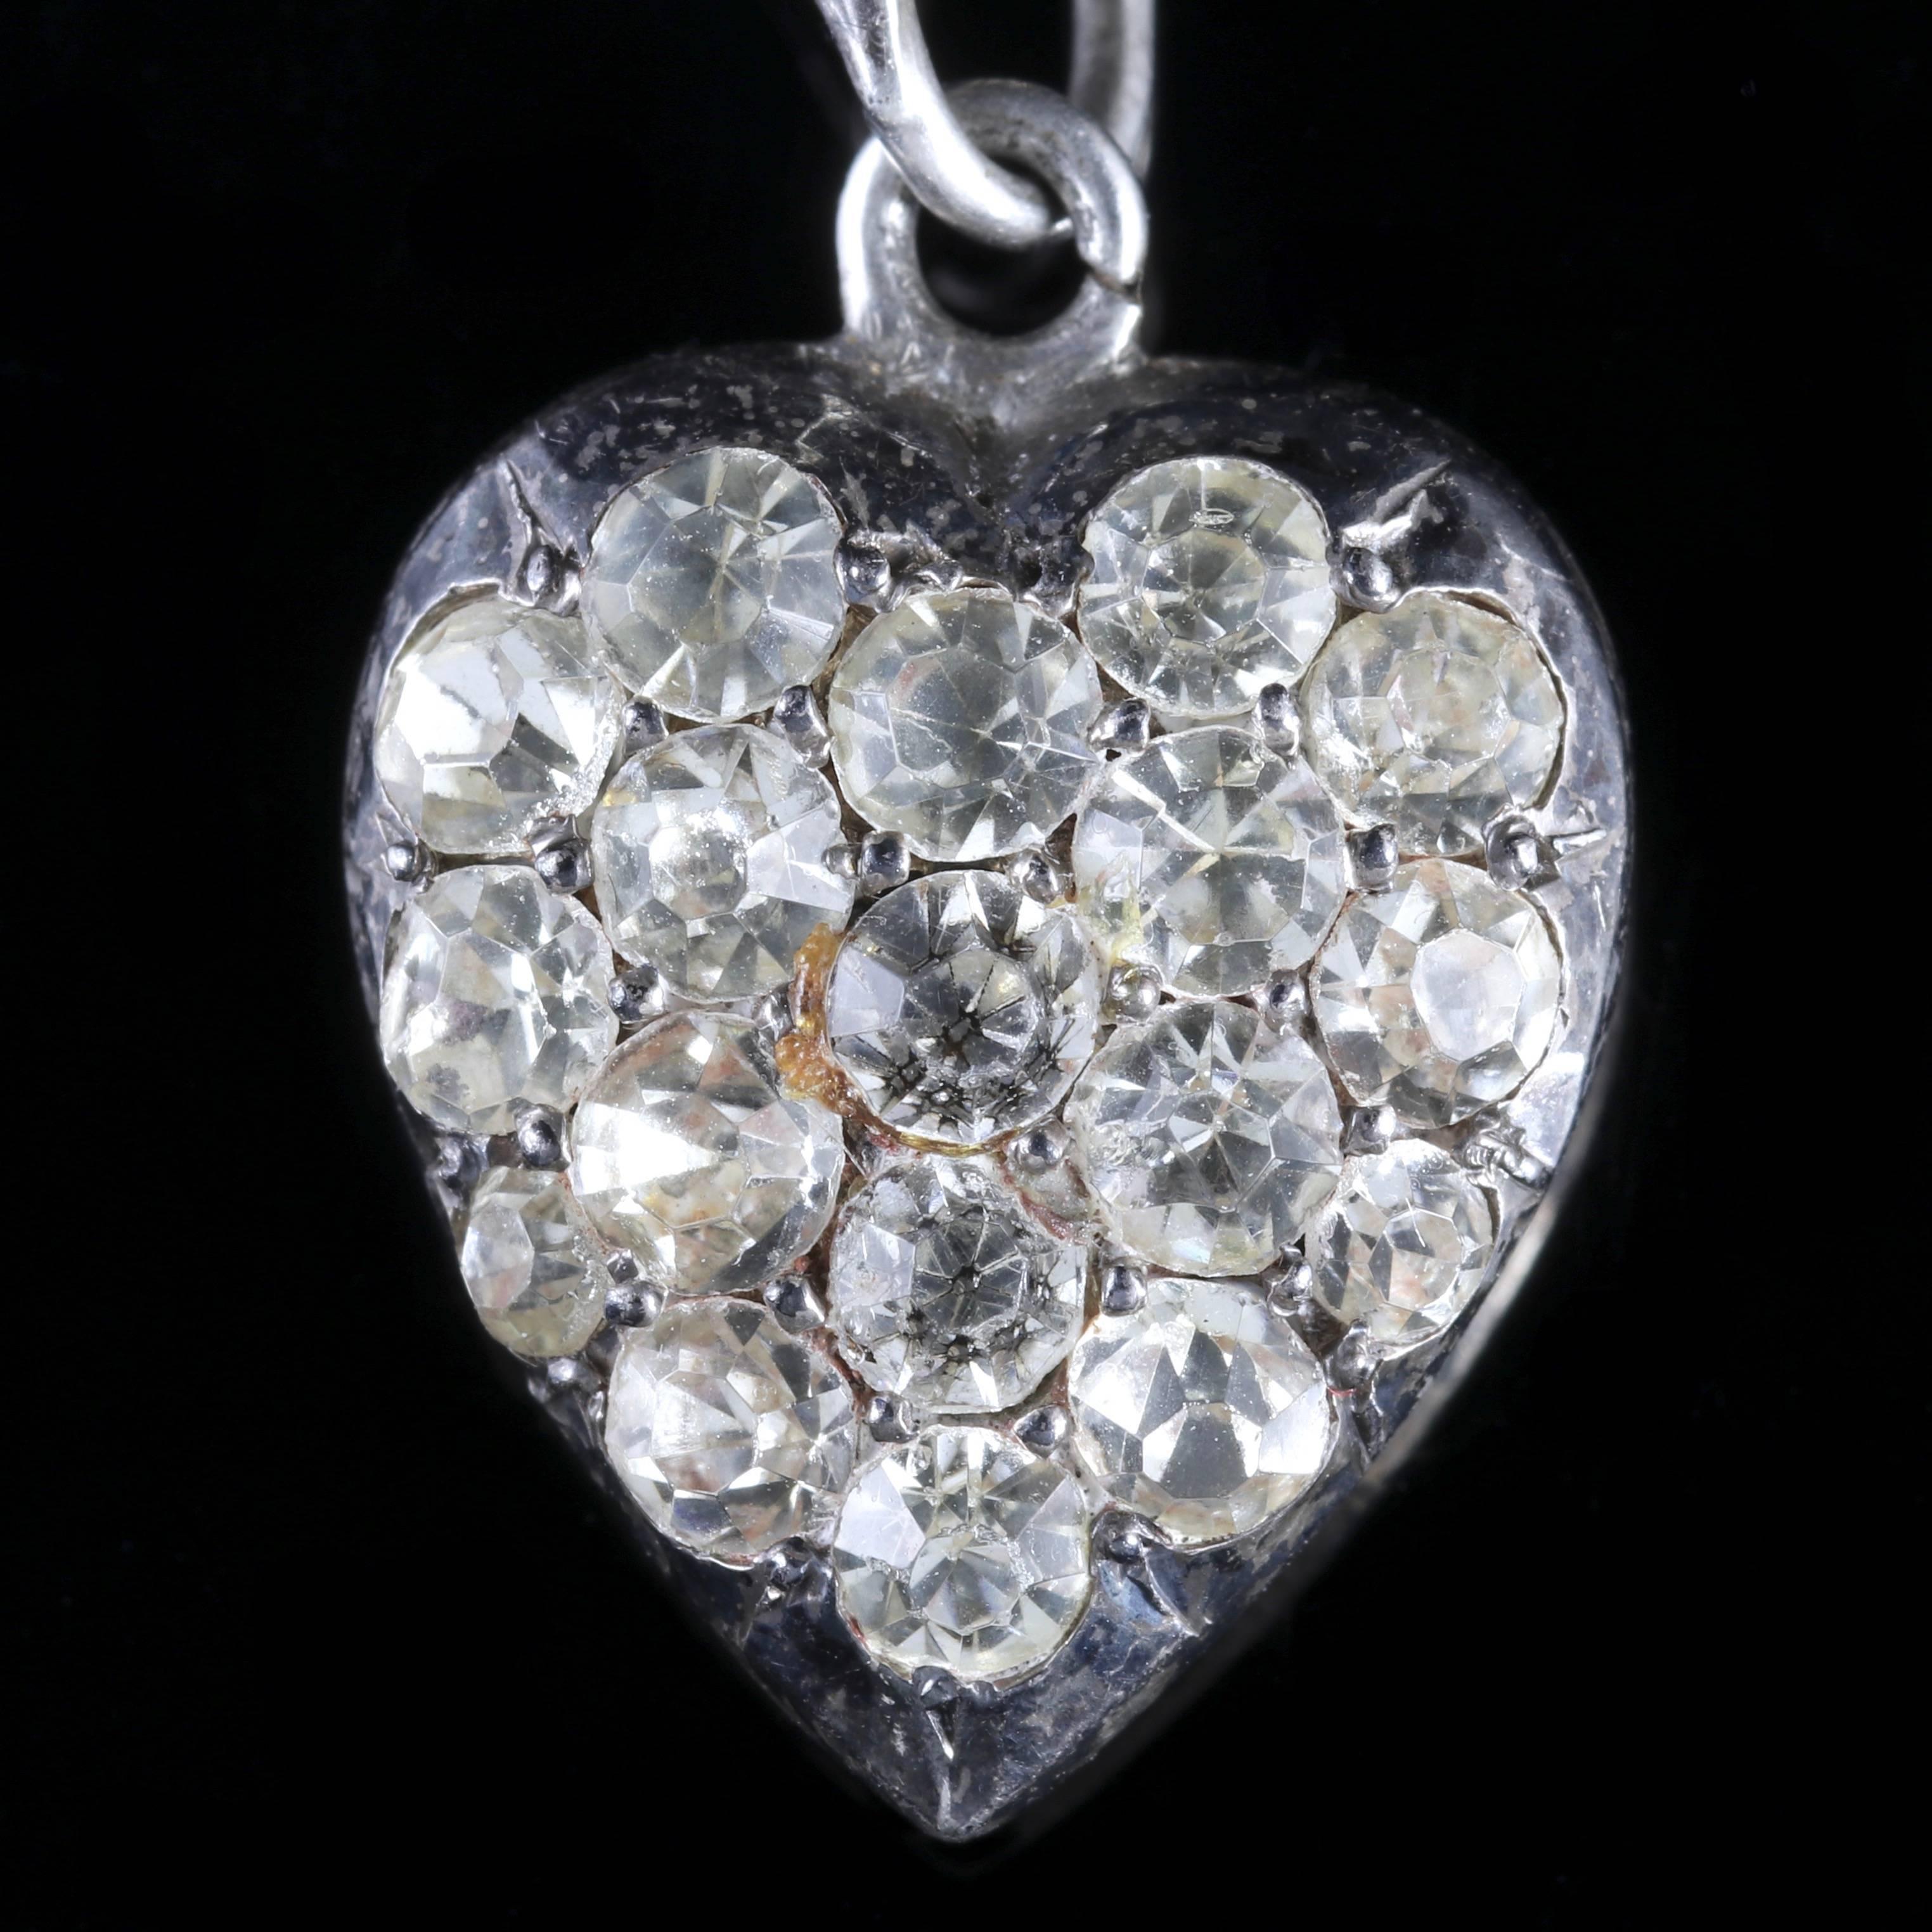 To read more please click continue reading below-

This very beautiful Sterling Silver Paste heart pendant and chain is genuine Georgian, Circa 1800.

Due to its age, Georgian jewellery is quite rare, with some pieces almost three hundred years old.